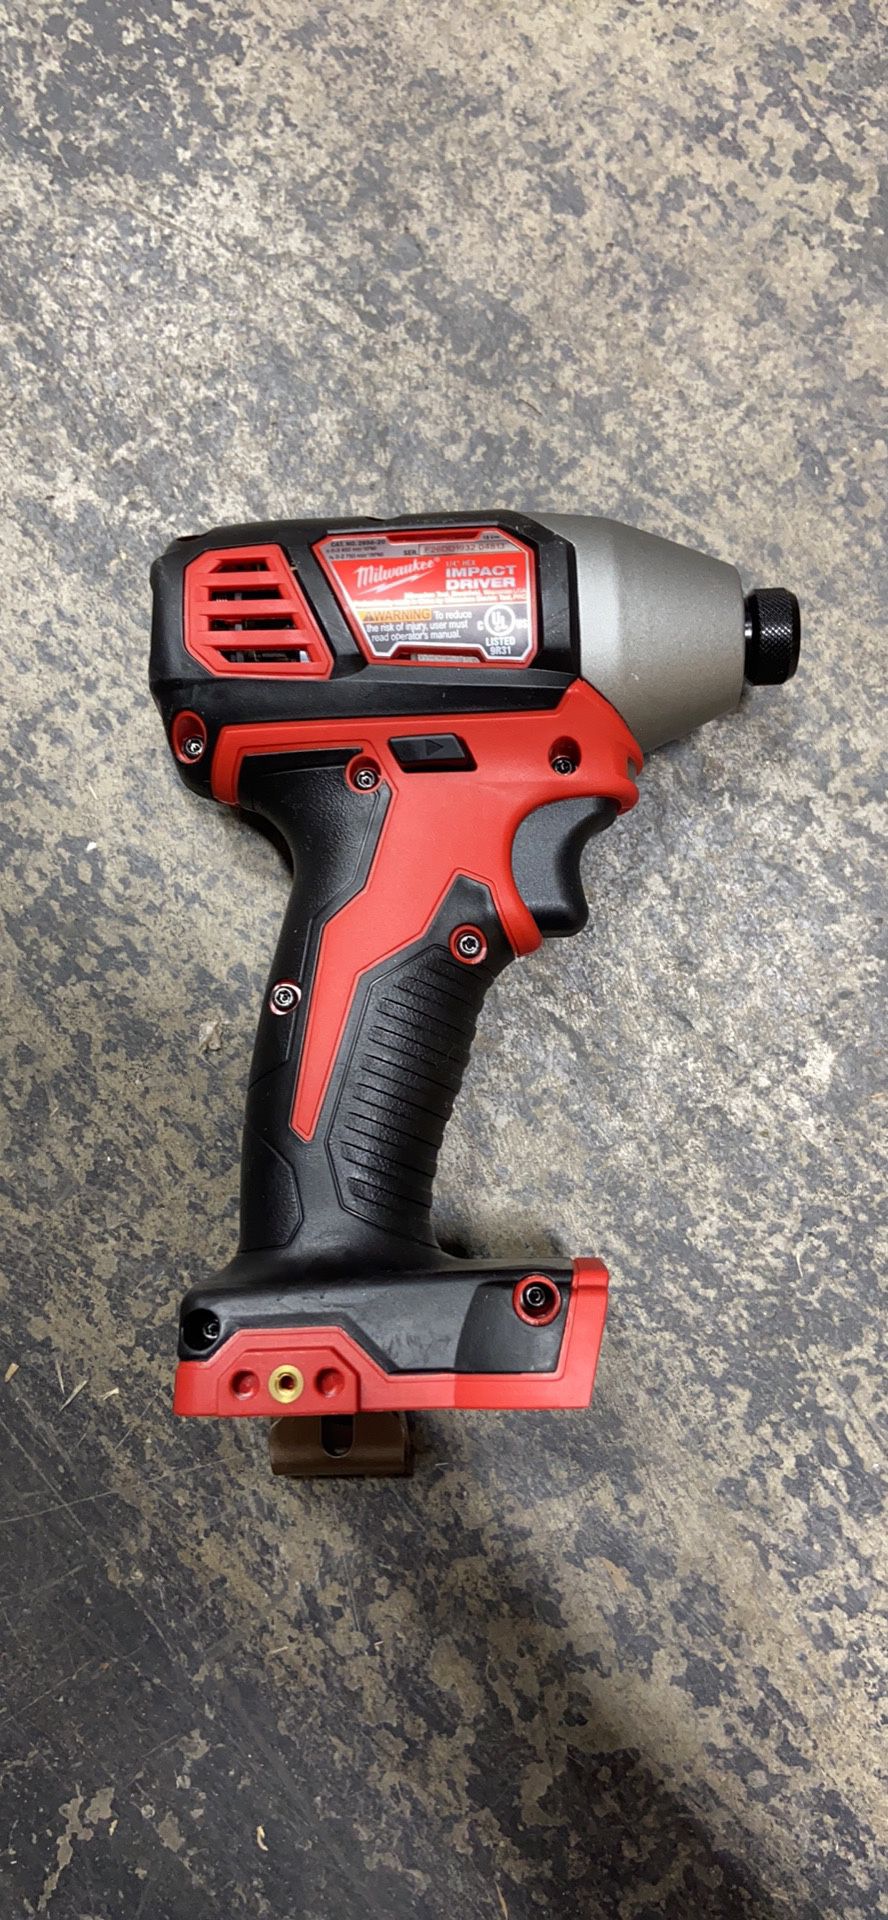 Brand new Milwaukee impact driver m18 *asking price only*